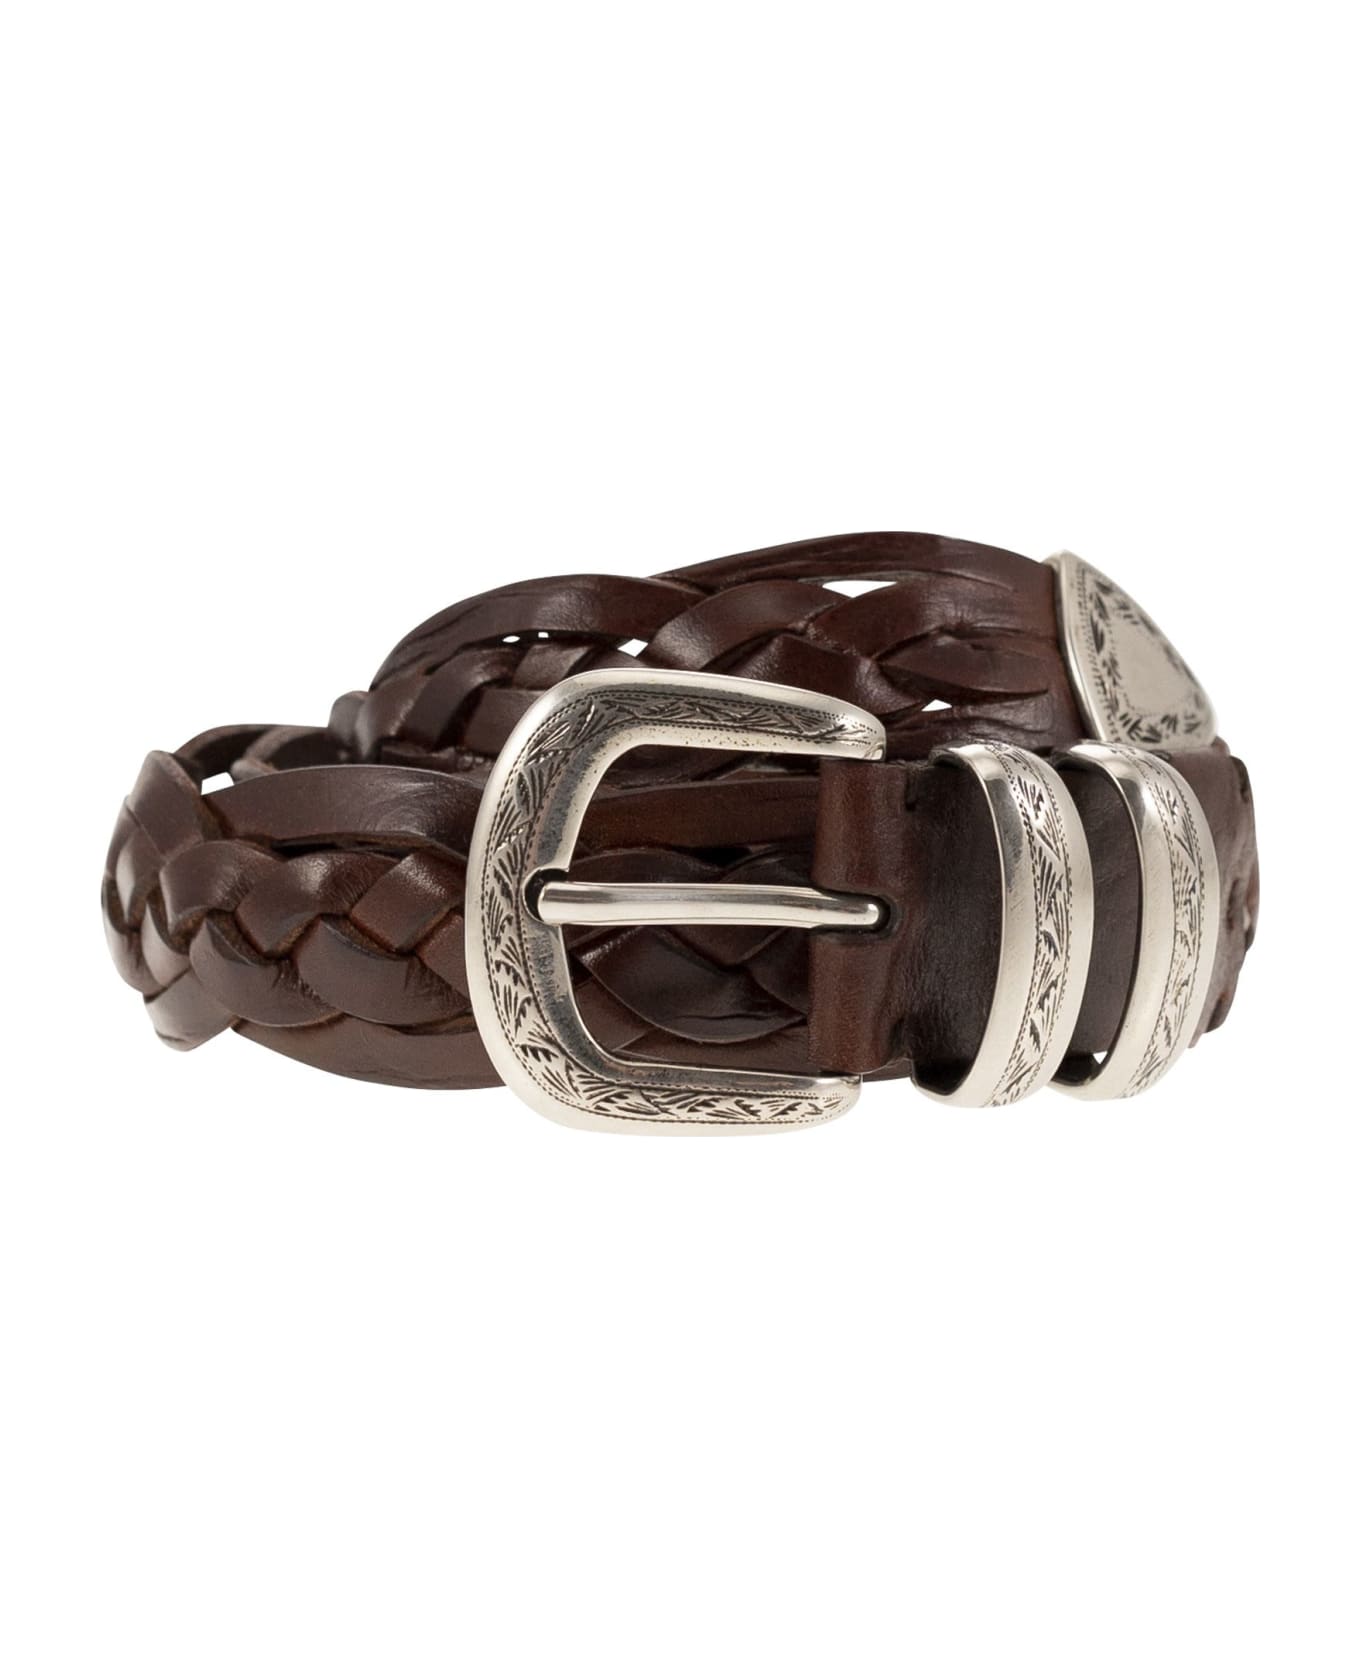 Brunello Cucinelli Braided Calfskin Belt With Detailed Buckle And Tip - Tobacco